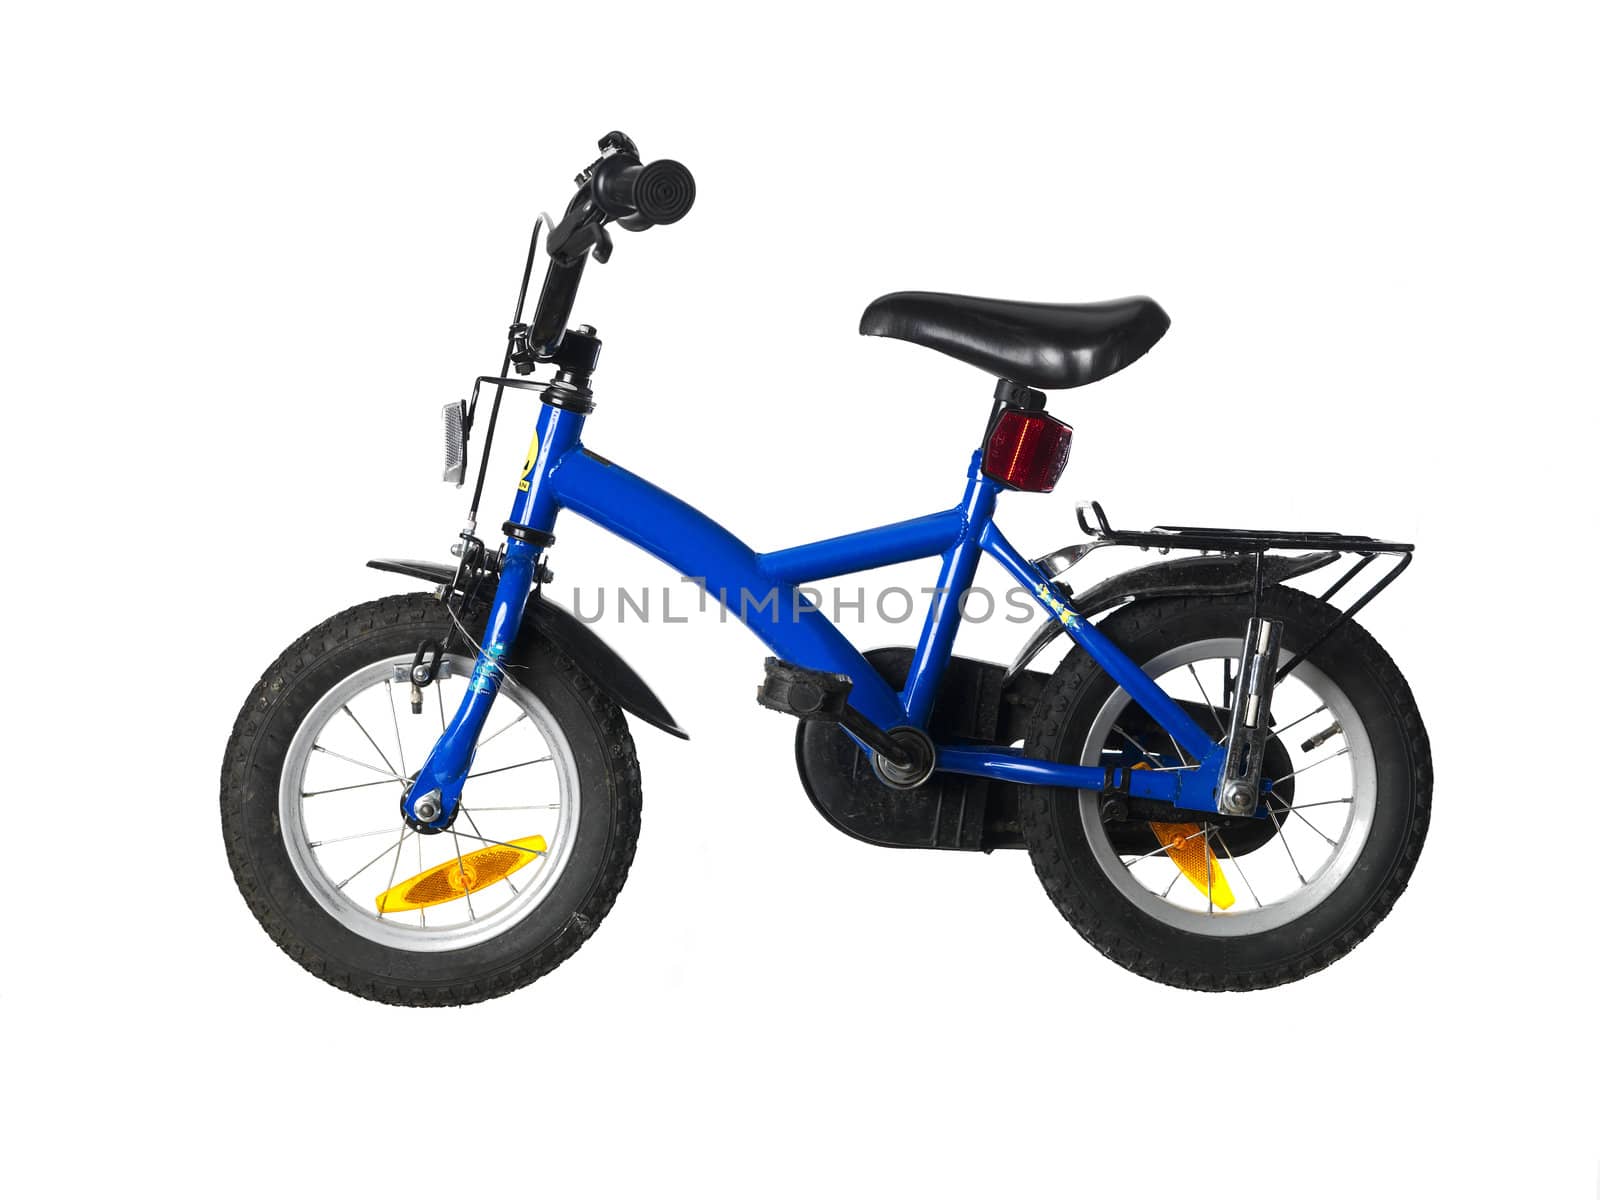 Childs bicycle by gemenacom